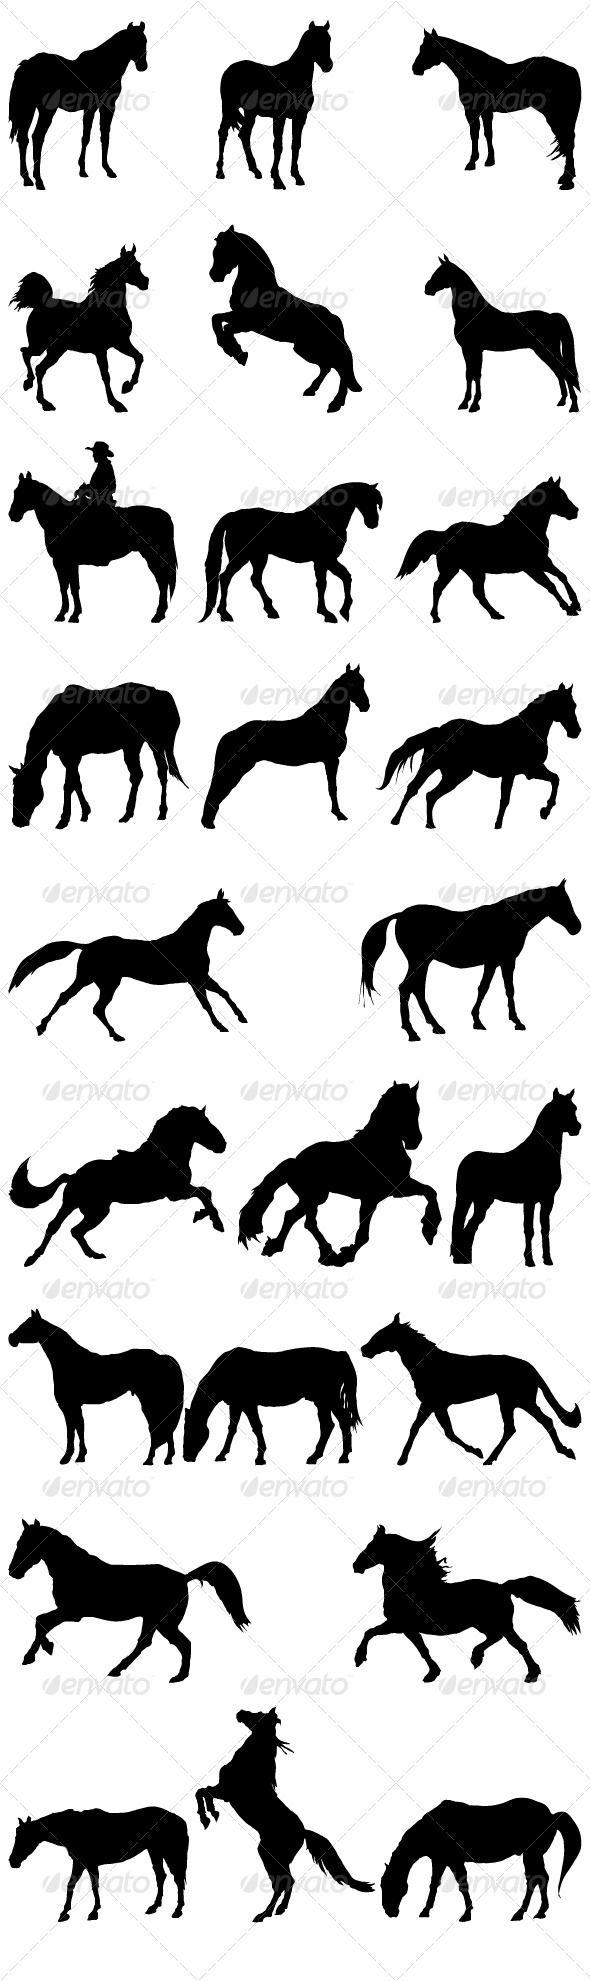 25+ best ideas about Horse Silhouette on Pinterest.